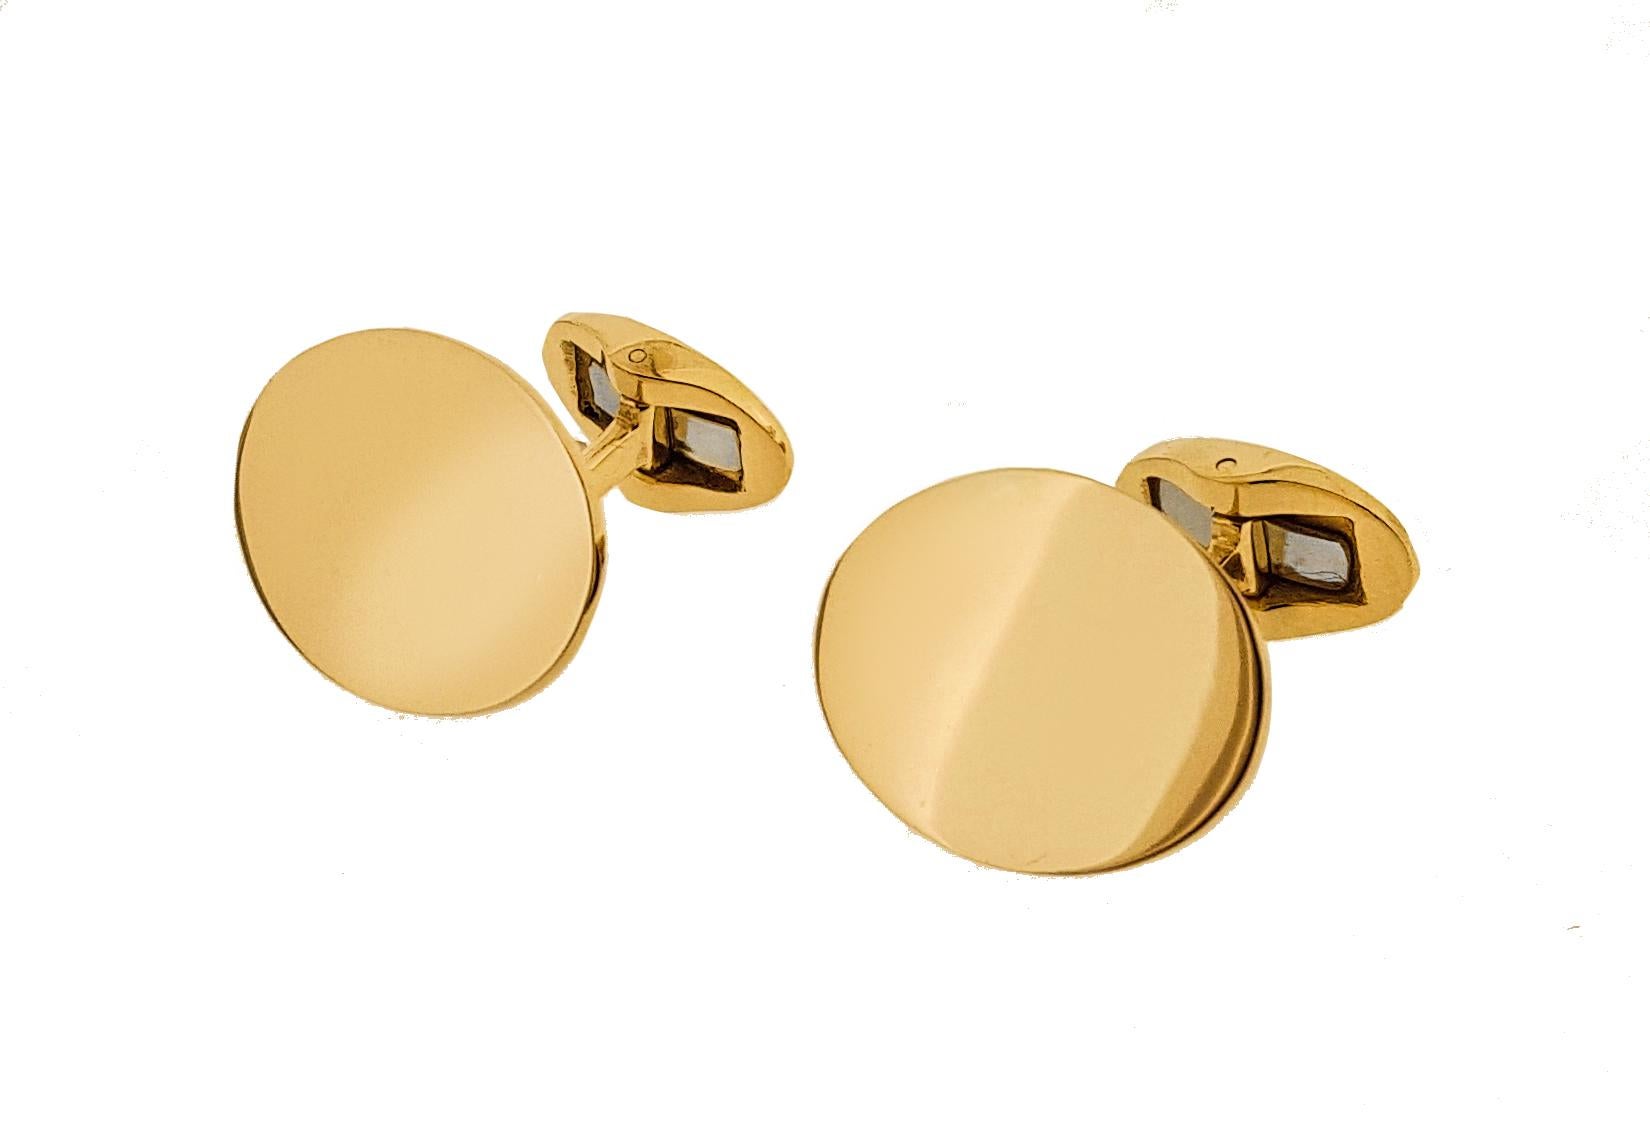 These beautiful 14kt yellow gold high polished flat oval cufflinks are beautiful as they are or perfect for custom engraving. Main decorative end measures approximately 19.75x15.5mm. 